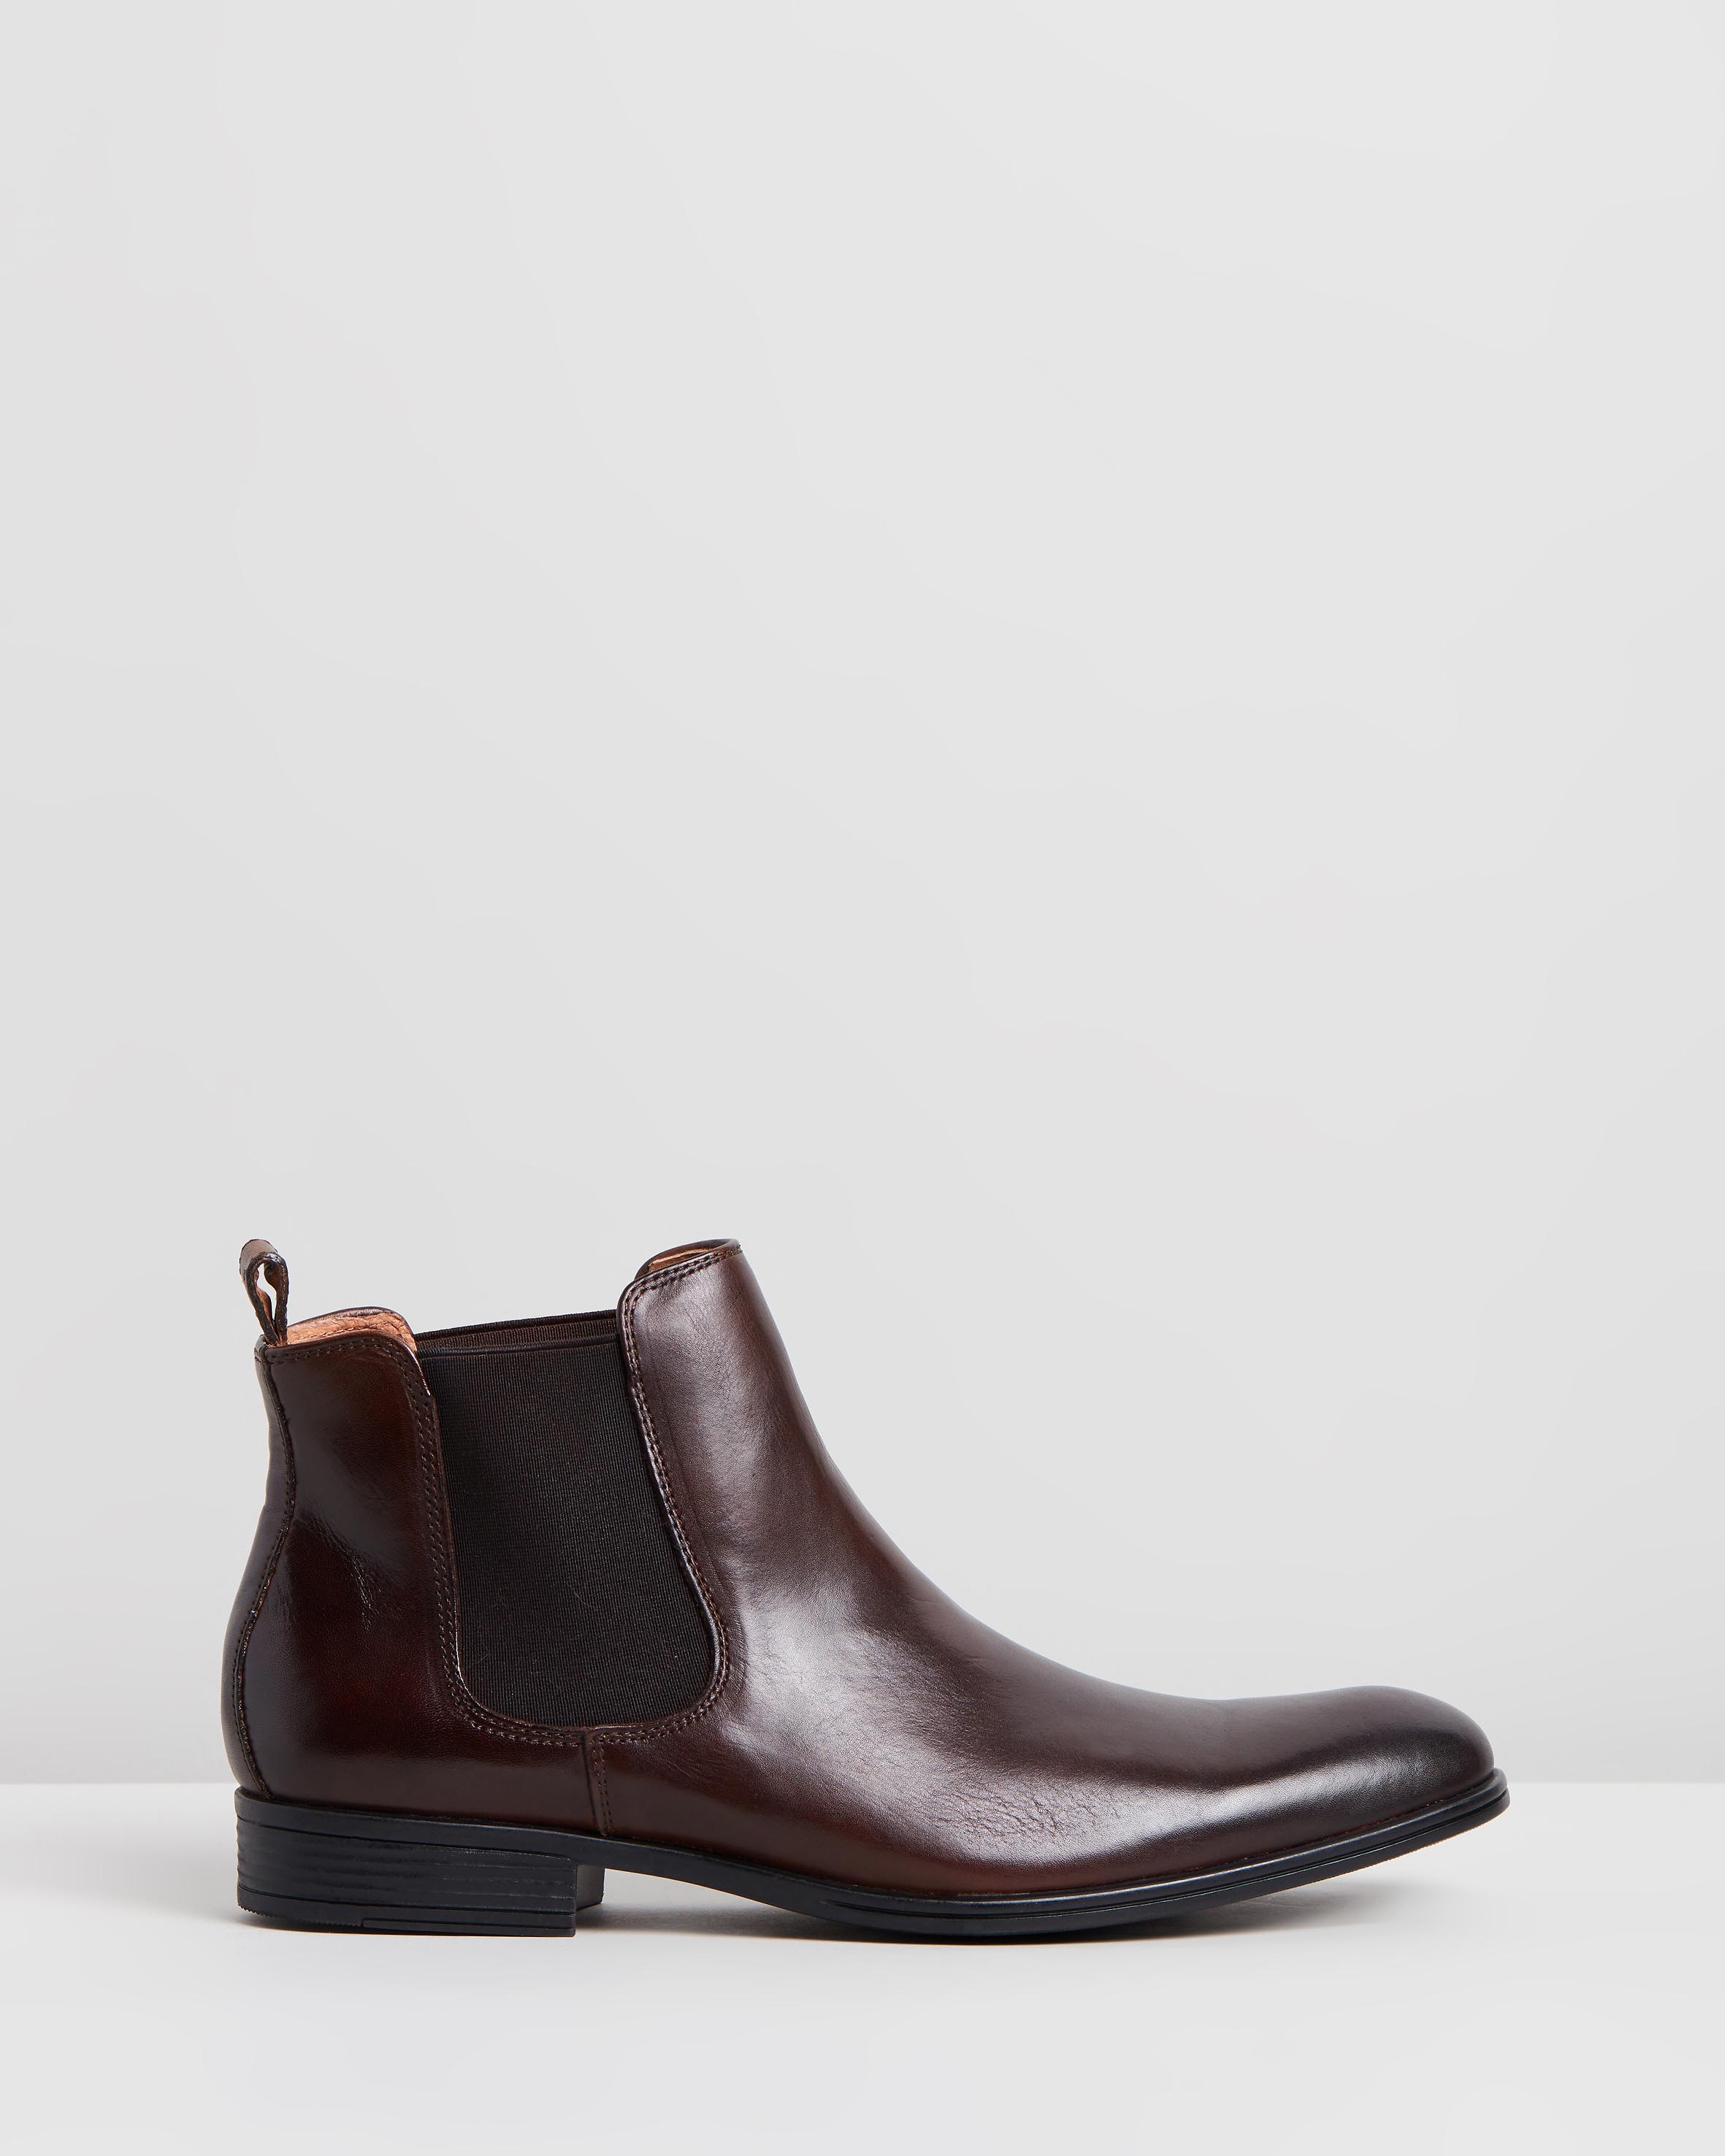 Pace Performance Chelsea Boots Brown by Jeff Banks | ShoeSales